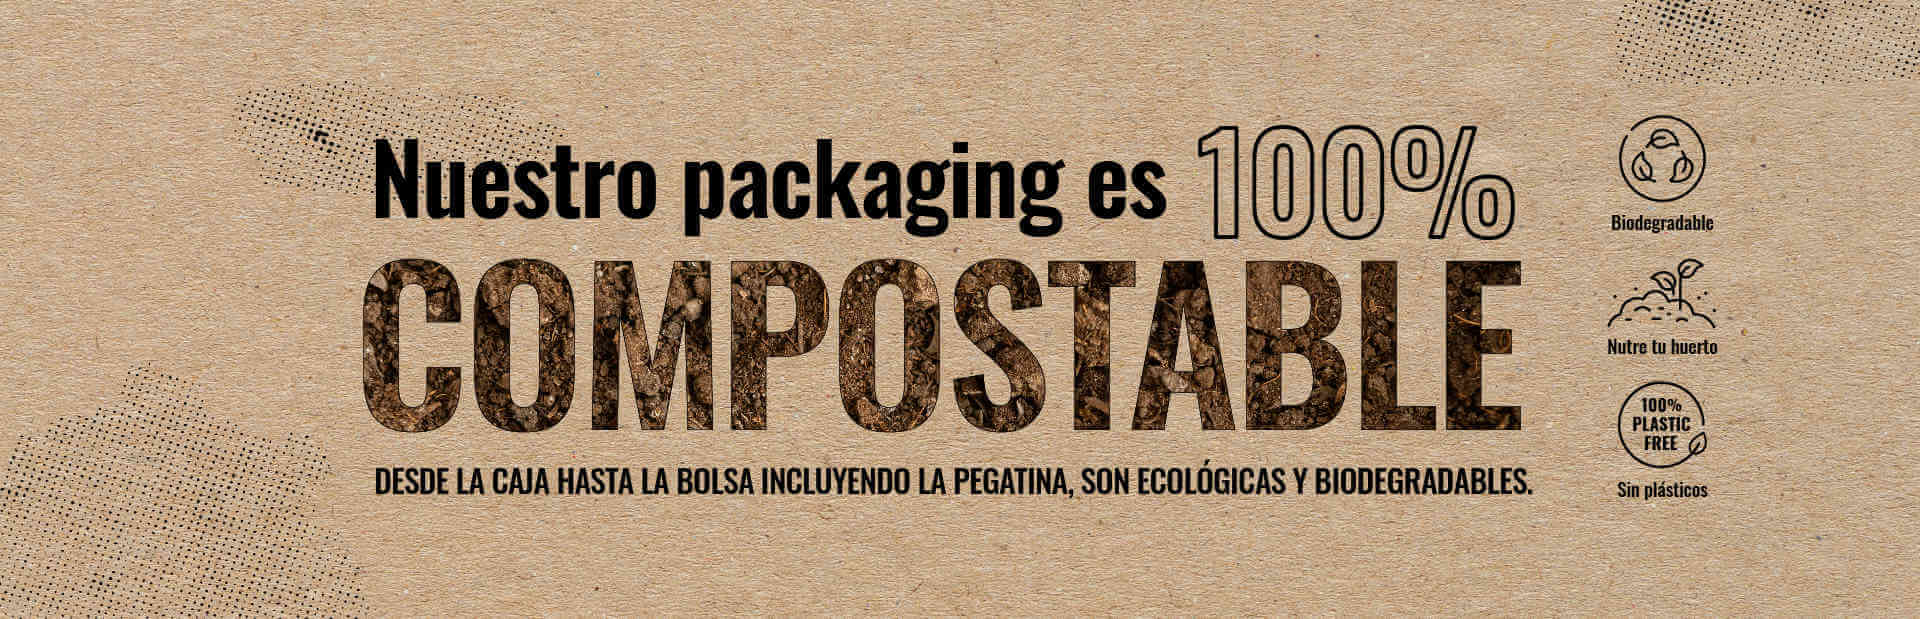 emballage compostable 4 collecteurs